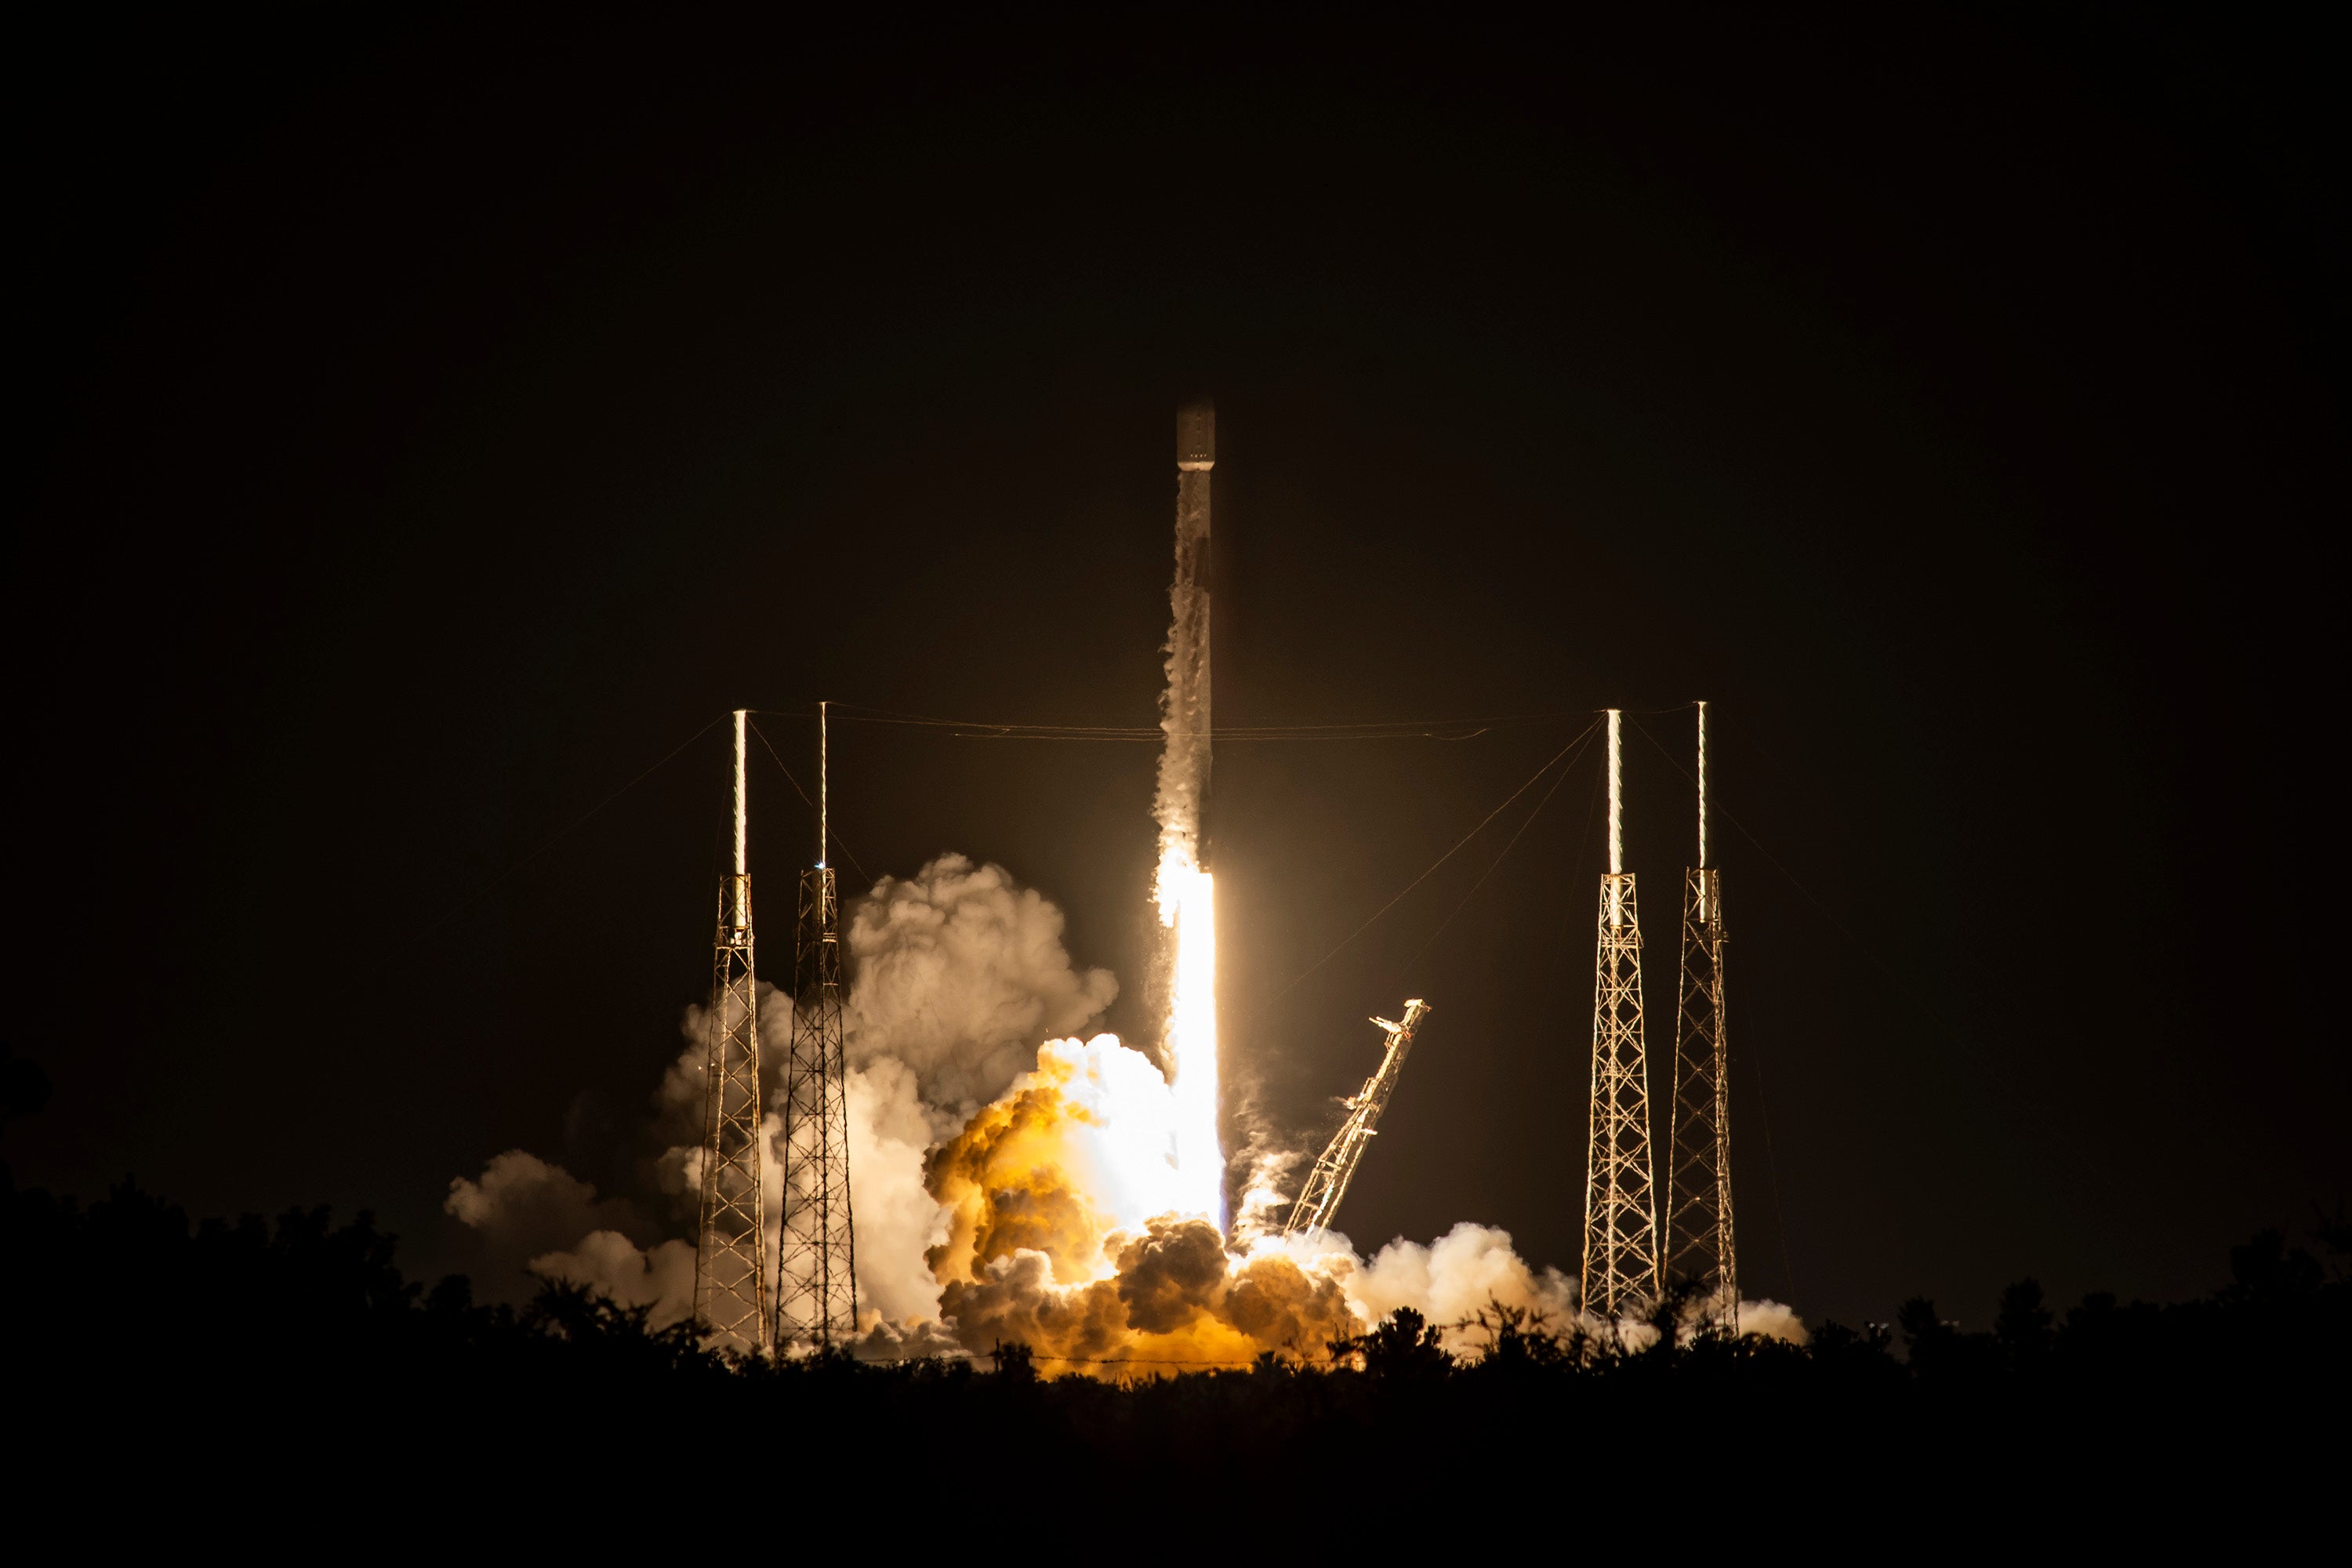 SpaceX launches another fleet of Starlink V2 Mini satellites to enhance the internet network